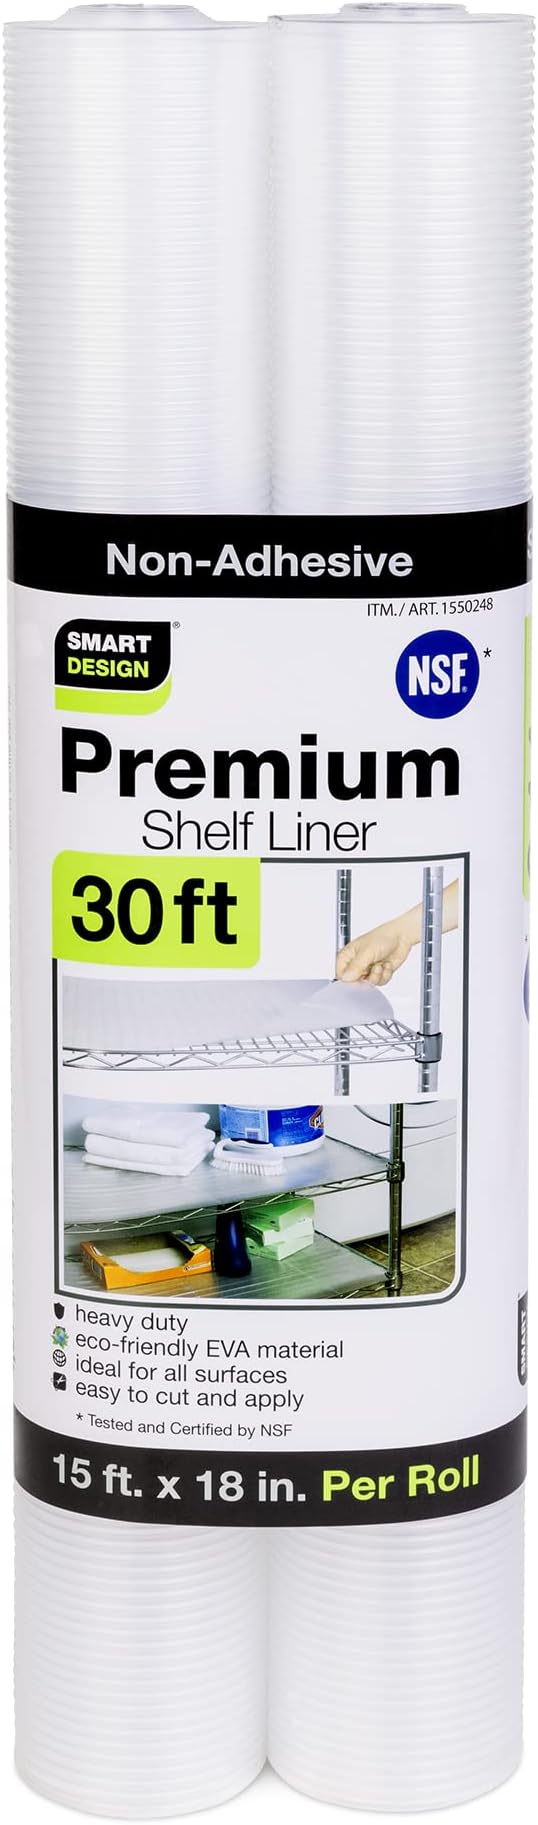 Smart Design Wire Shelf Liner Ribbed Grip - 18 Inch x 30 Feet Total (Set of 2 Rolls) - Metal Wire Shelving Non Adhesive Protection Garage Racks - NSF Certified - Kitchen - Clear